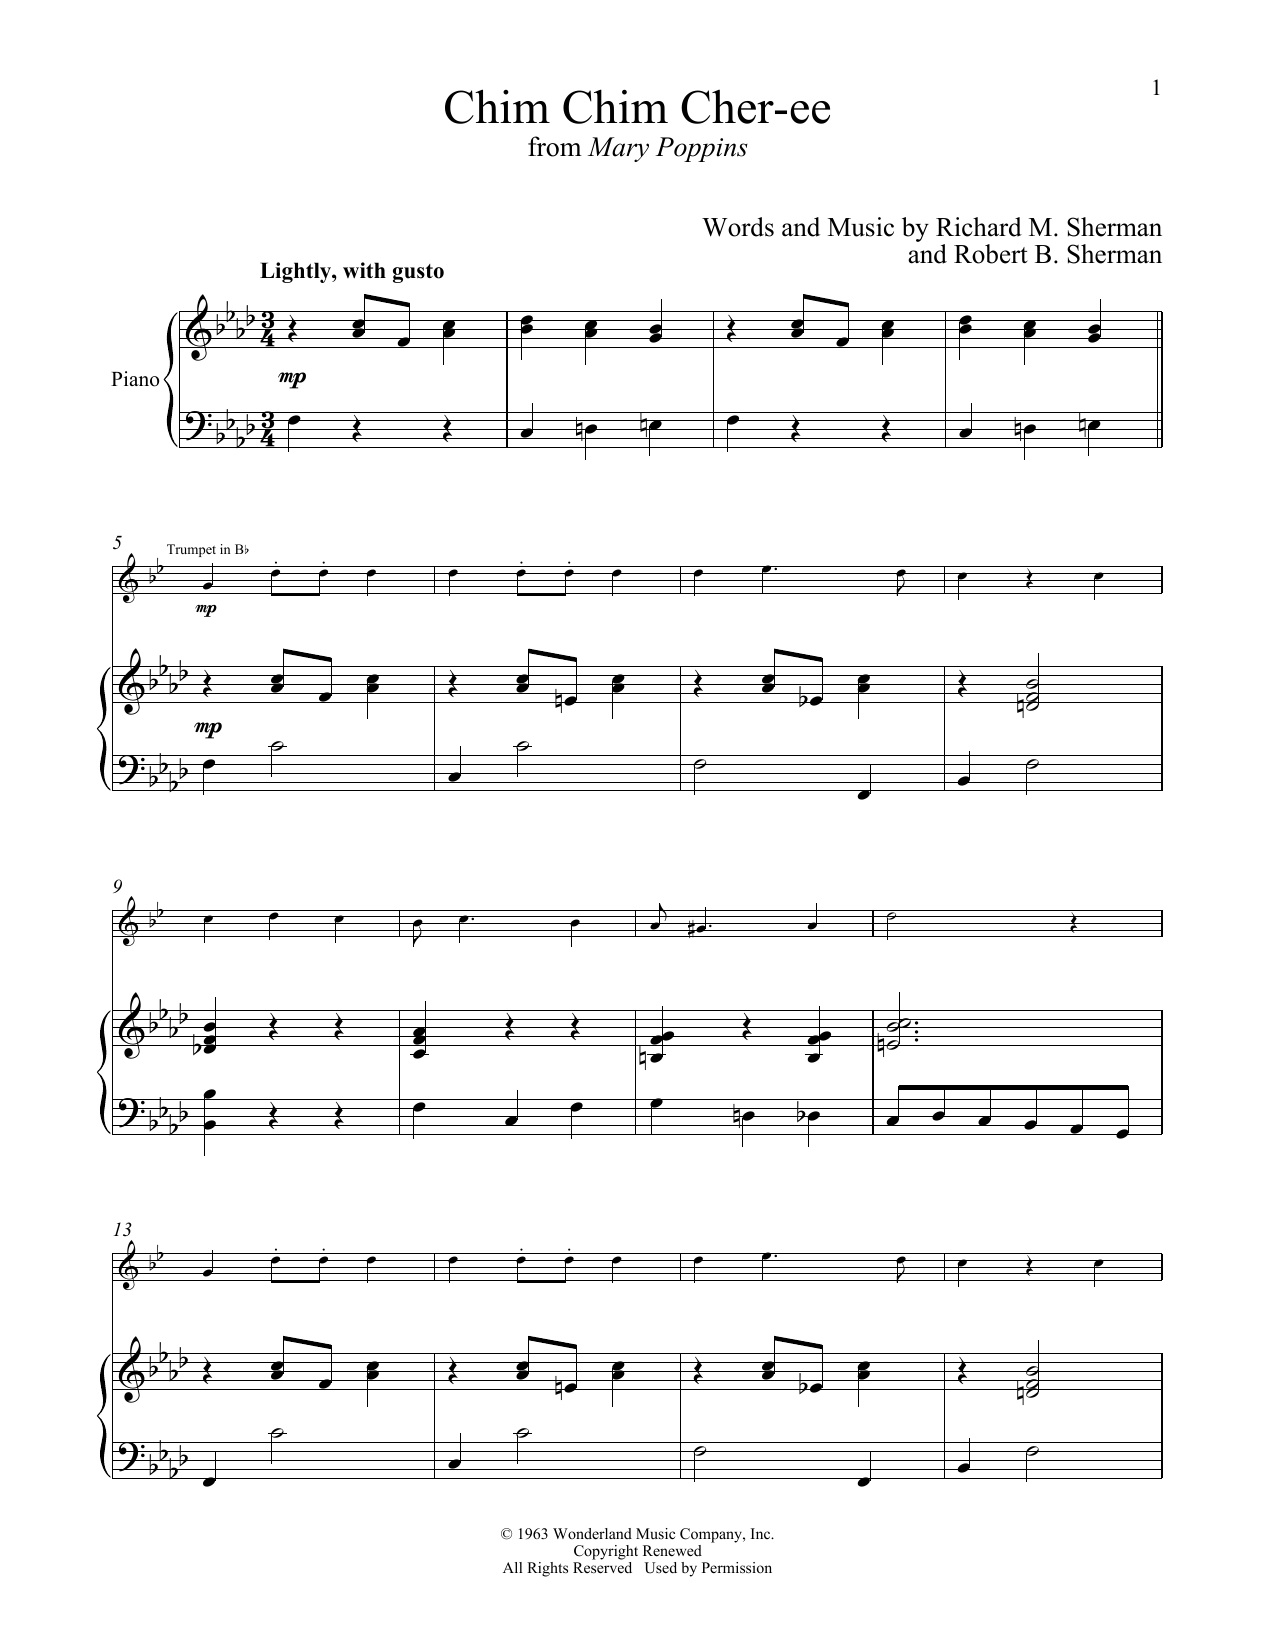 Download Sherman Brothers Chim Chim Cher-ee (from Mary Poppins) Sheet Music